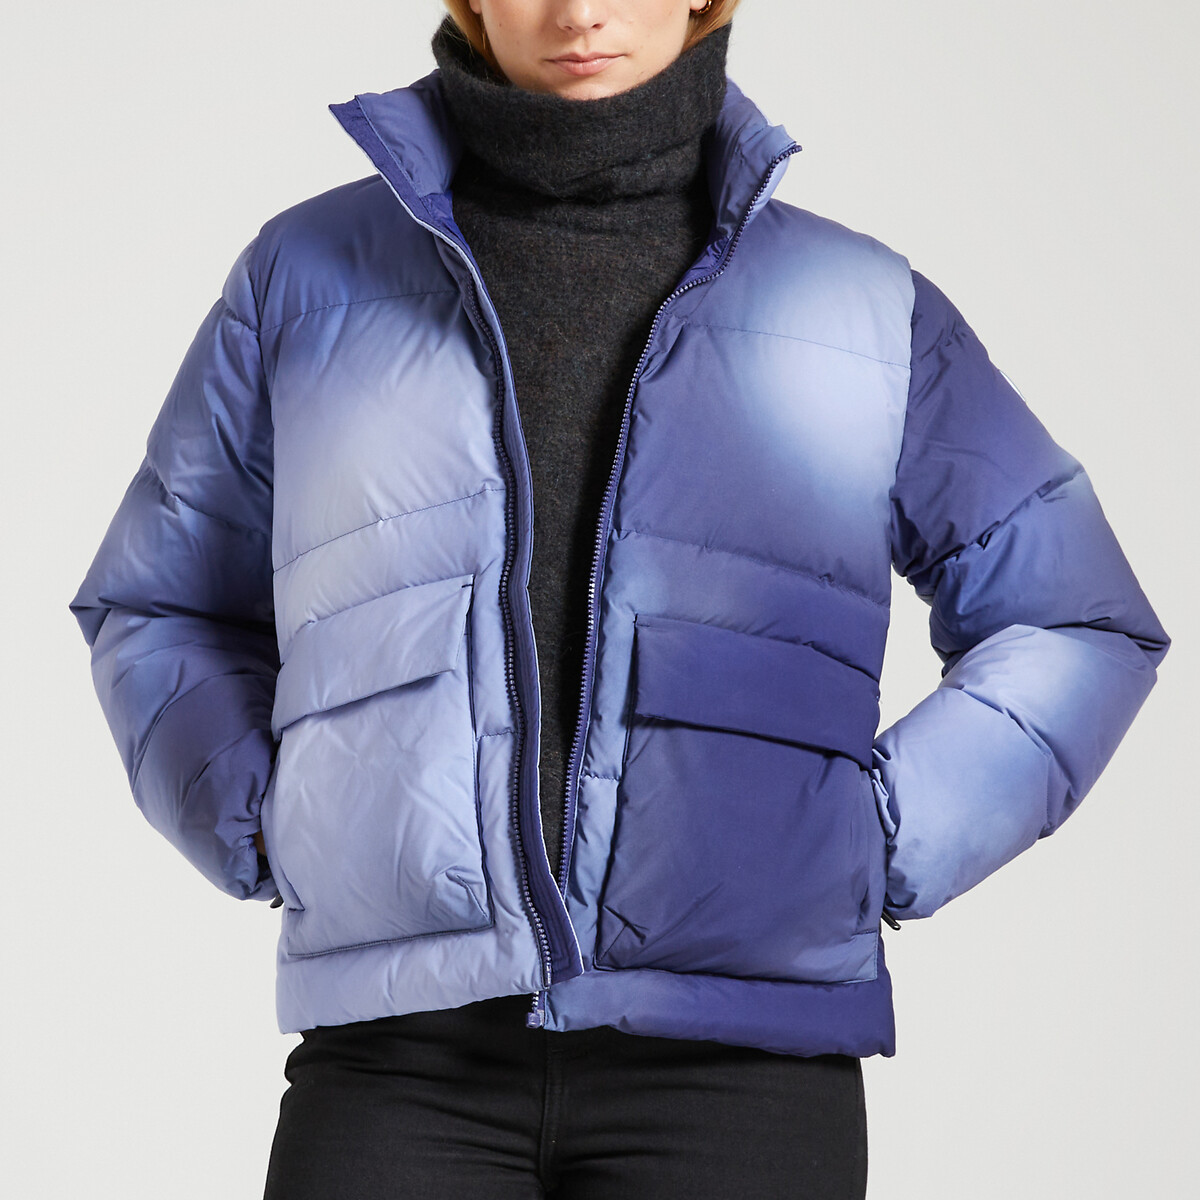 Shenzen Frost Padded Jacket in Straight Fit with High Neck